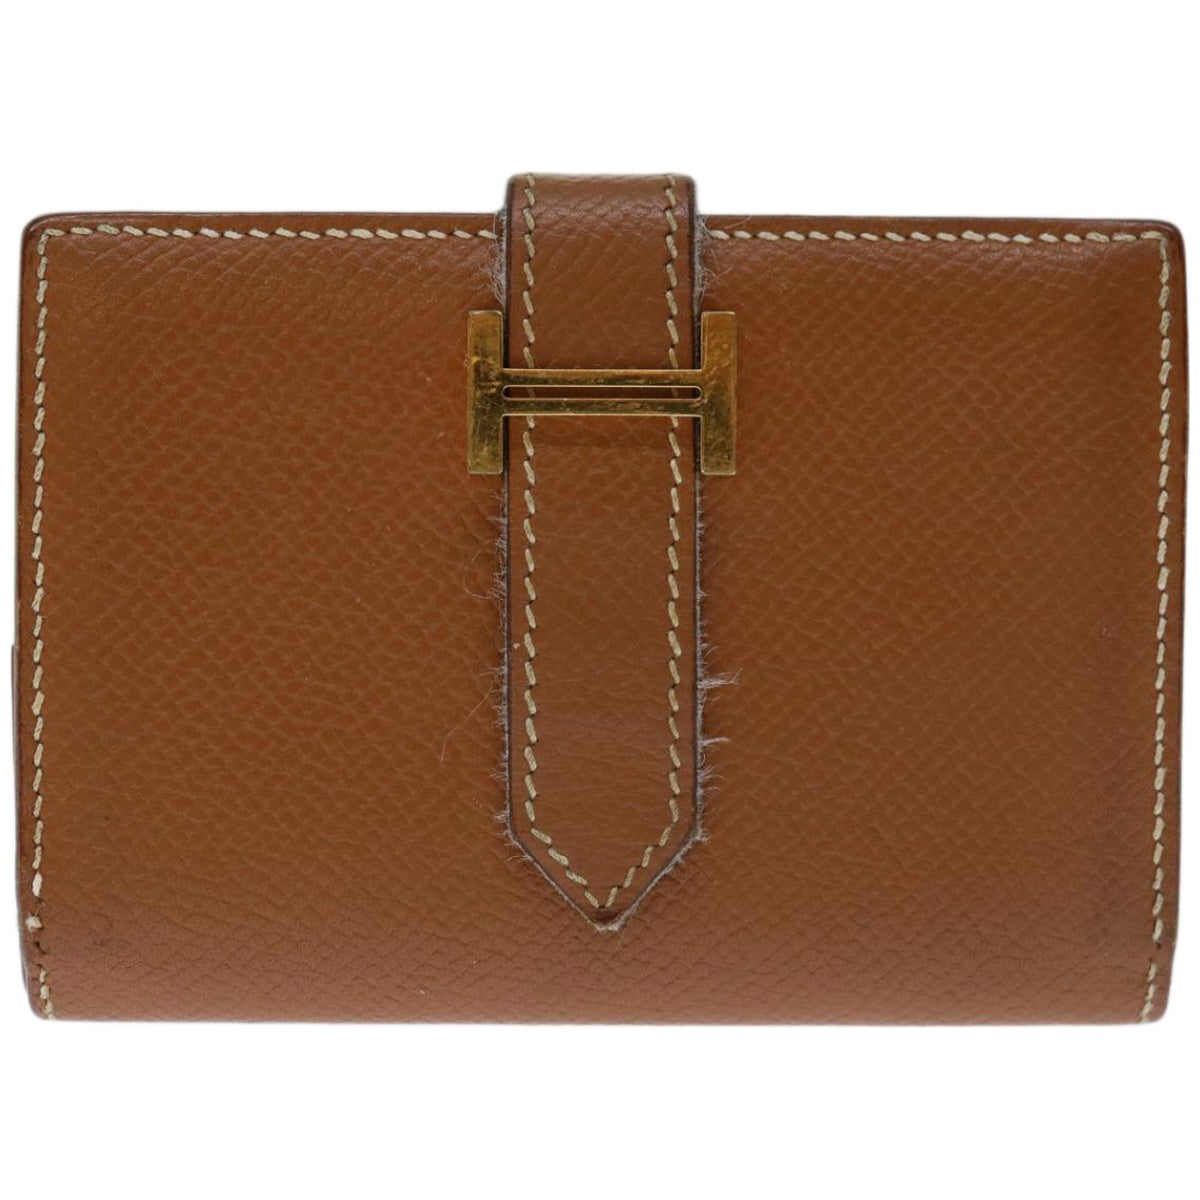 HERMES Bearn Card Case Leather Brown Auth 67553 - 0